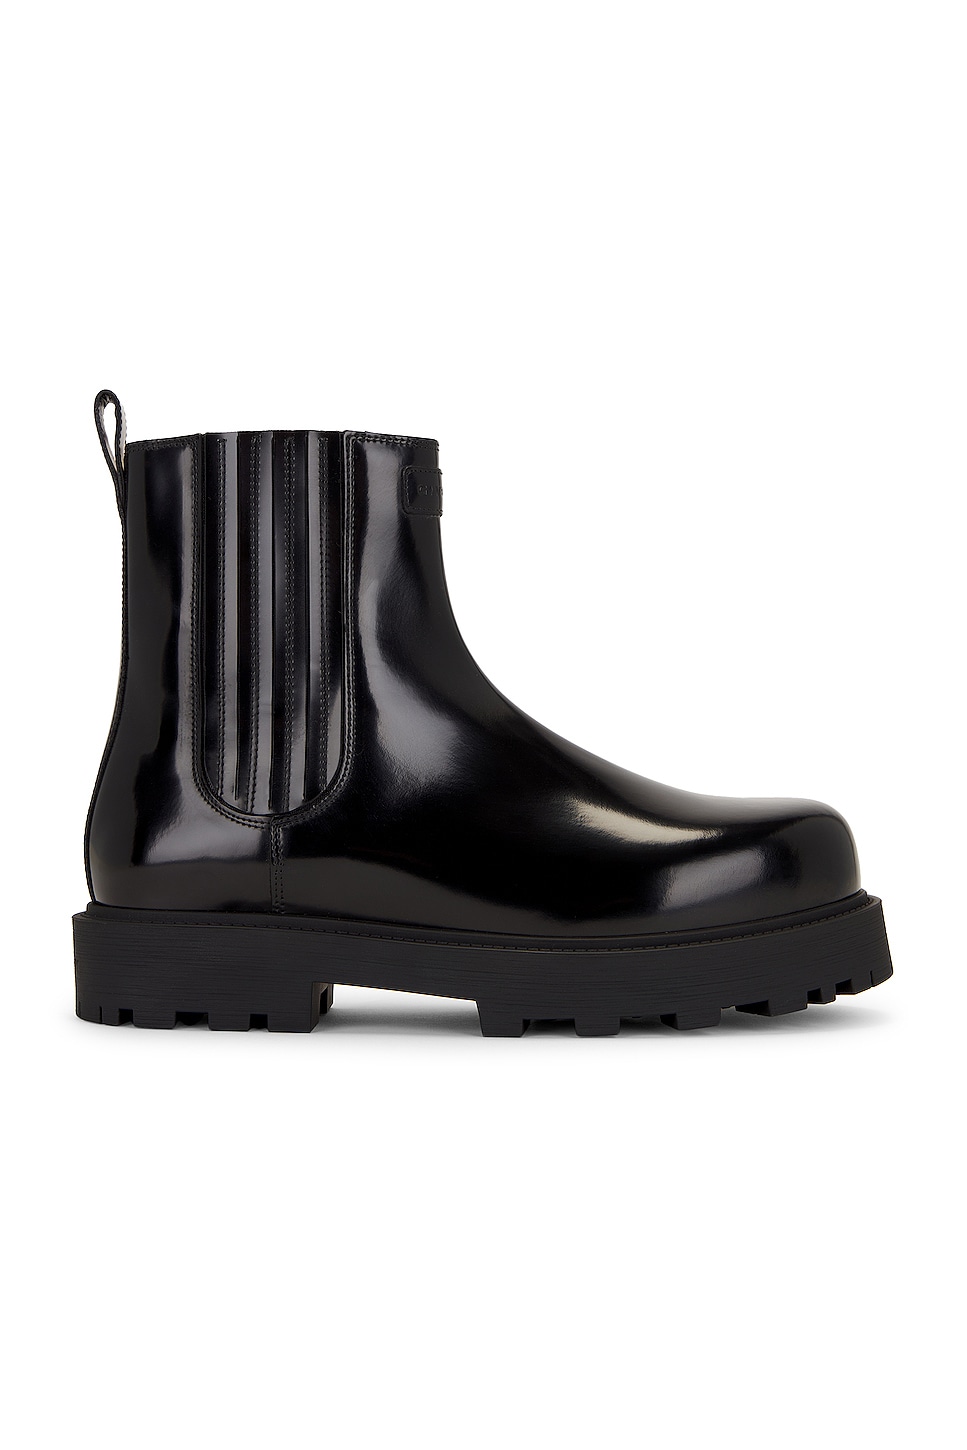 Image 1 of Givenchy Show Chelsea Boot in Black